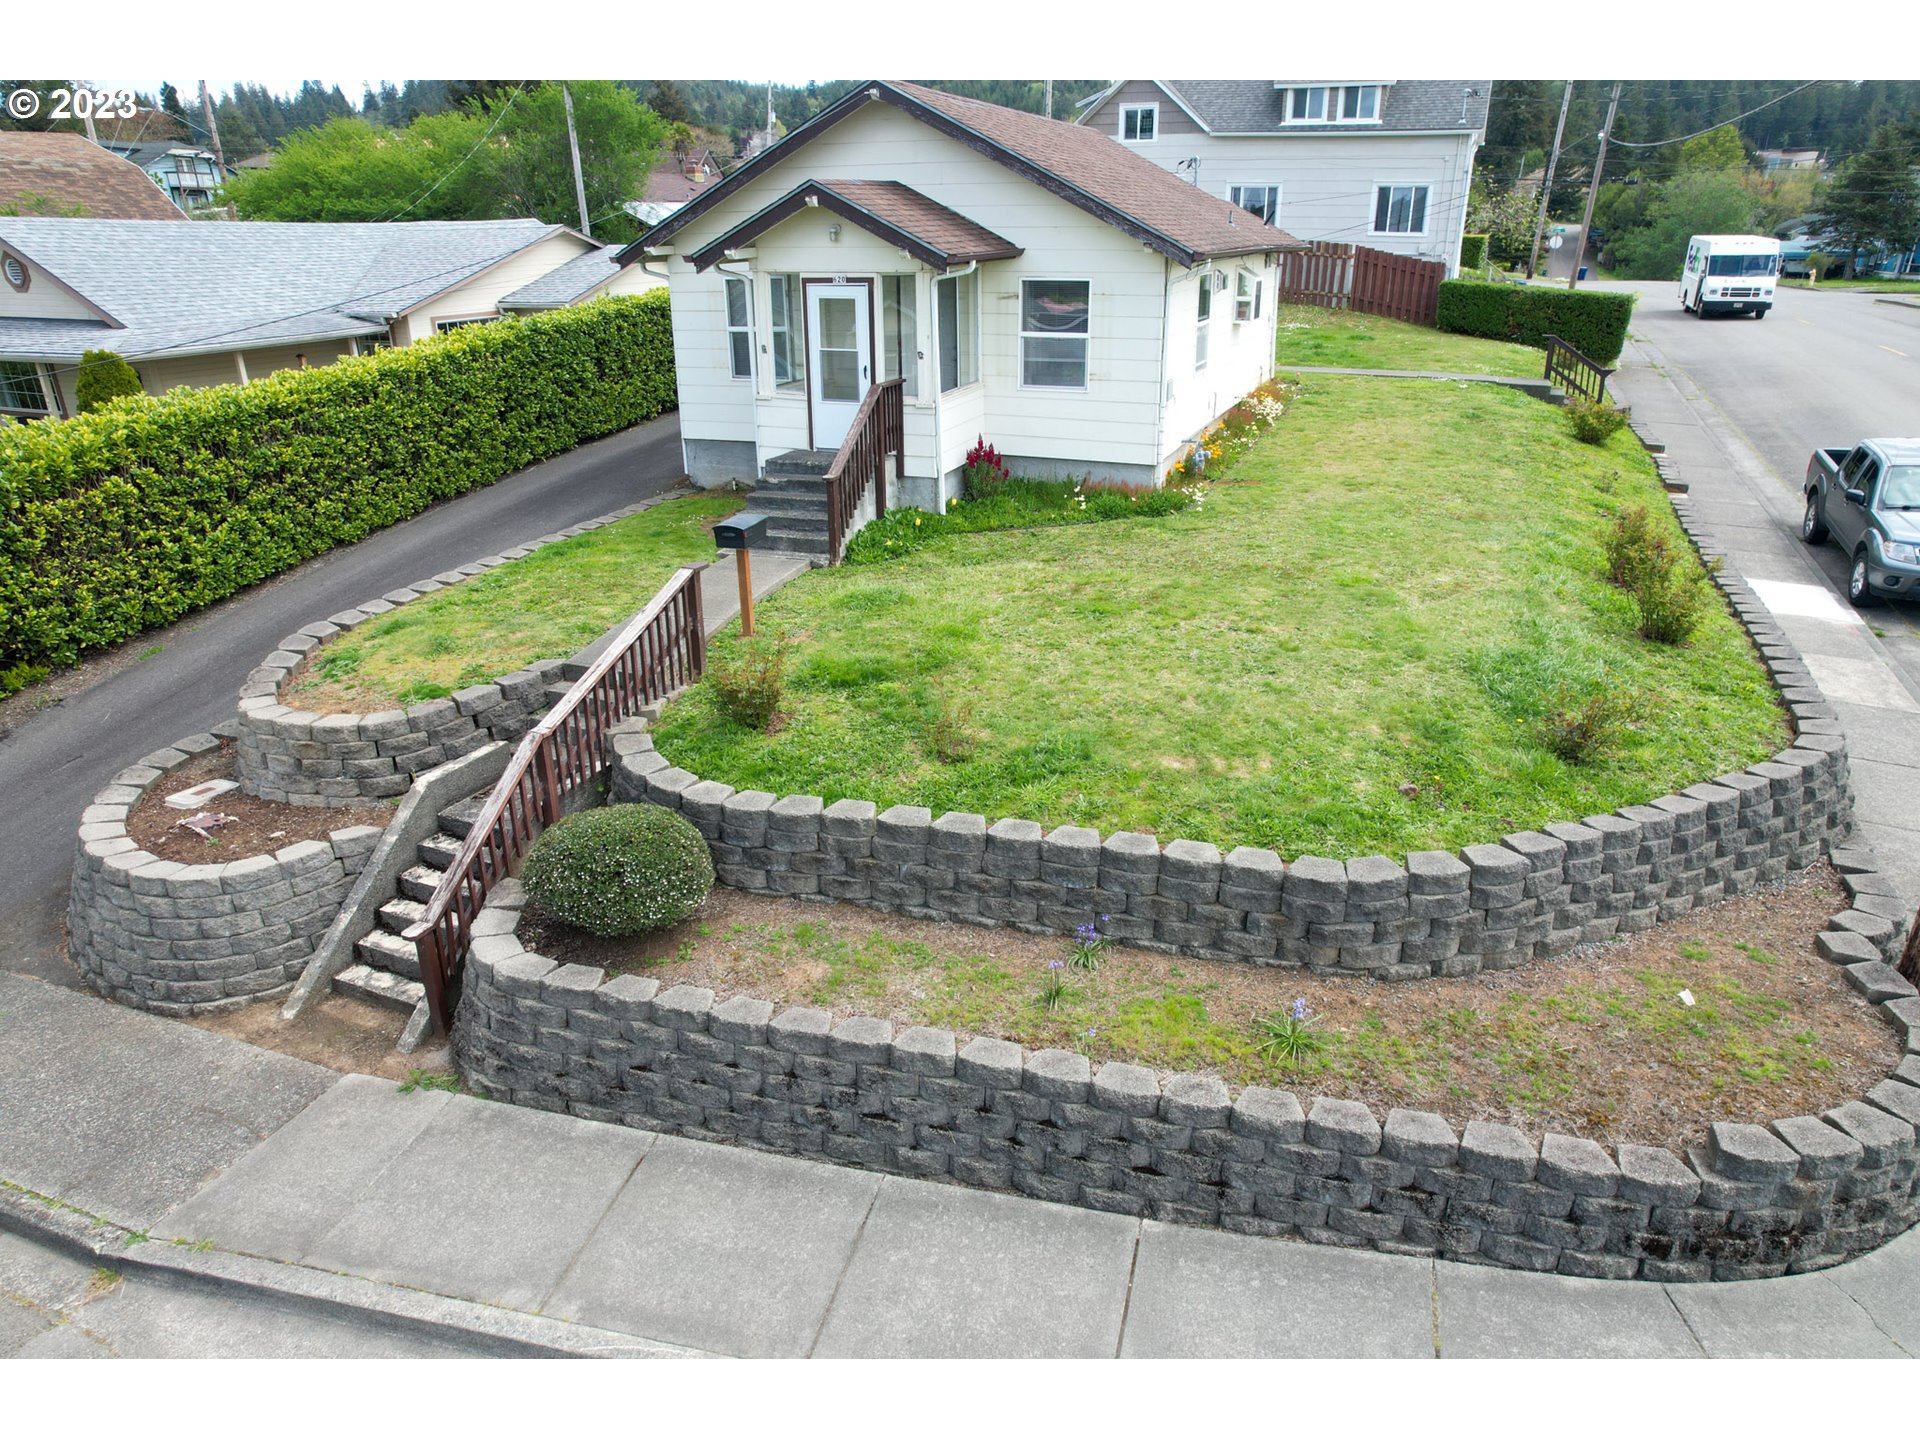 620 N BAXTER ST, Coquille, OR 97423